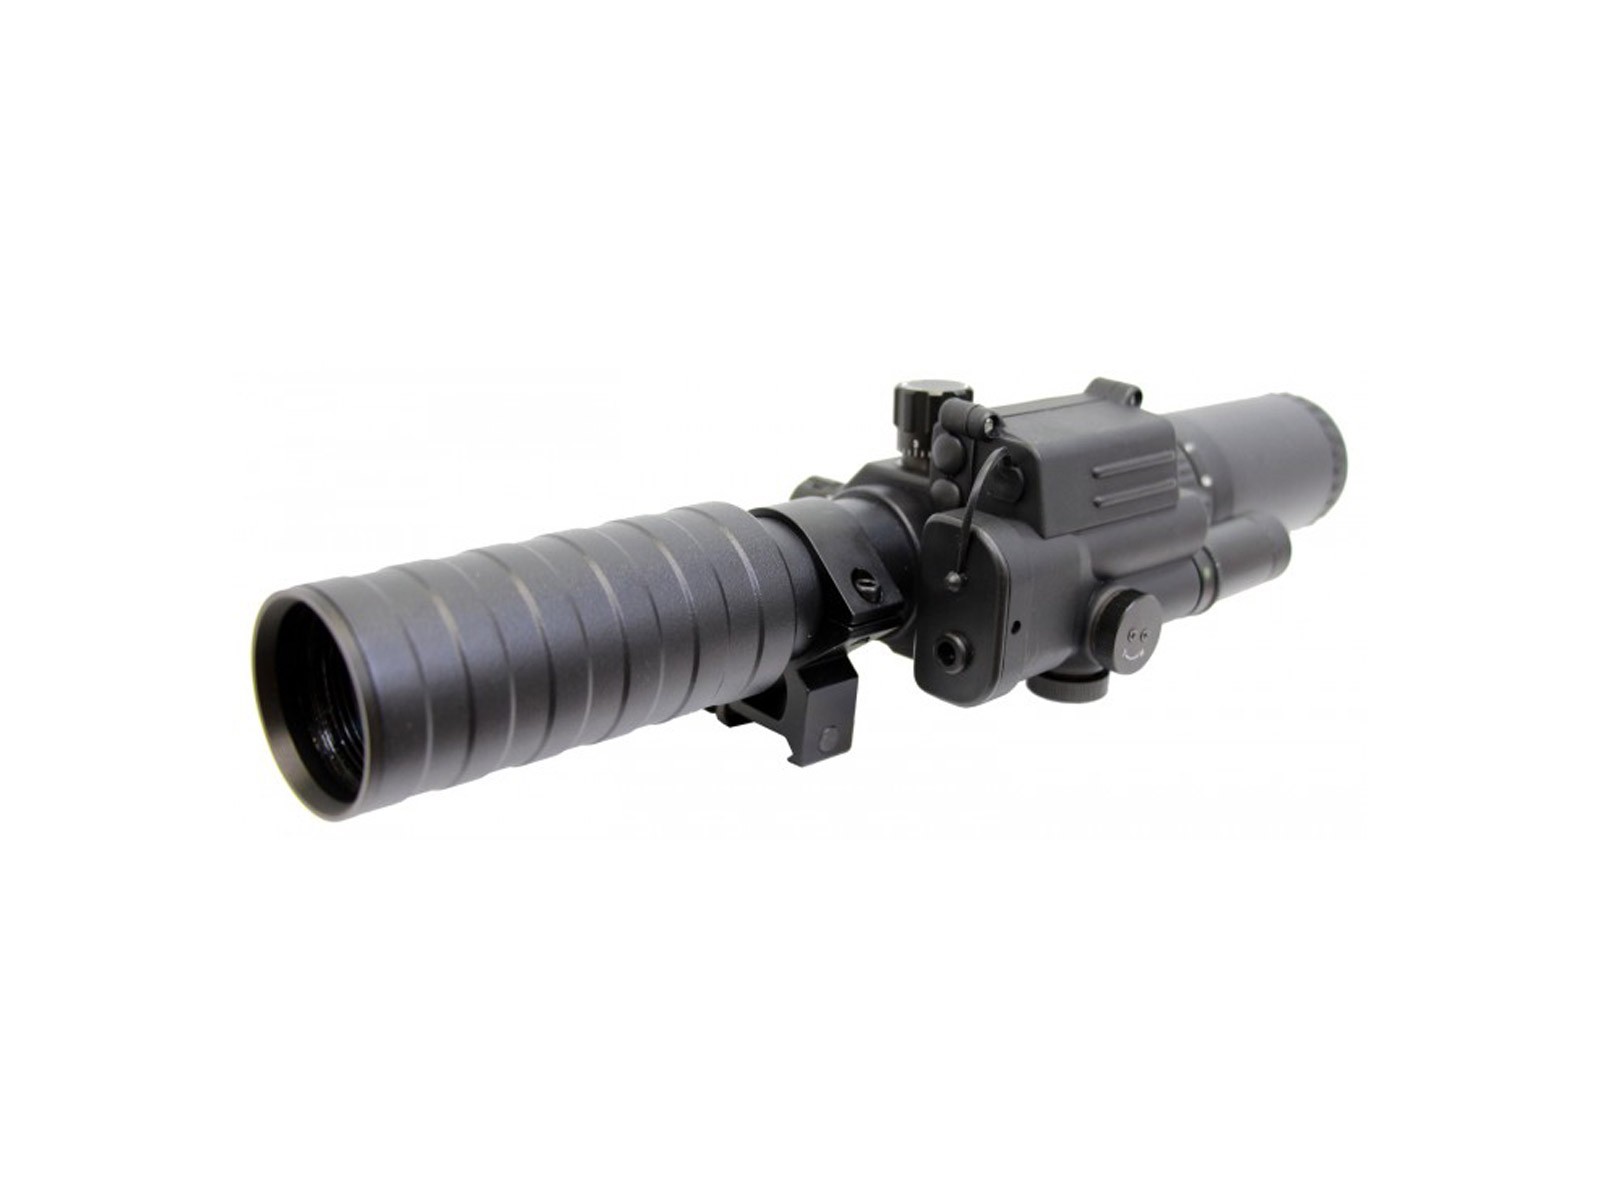 Spartan 3-9x32 Variable Rifle Scope With w/ Range Finder Reticle and Integrated Tactical Laser And Scope Rings